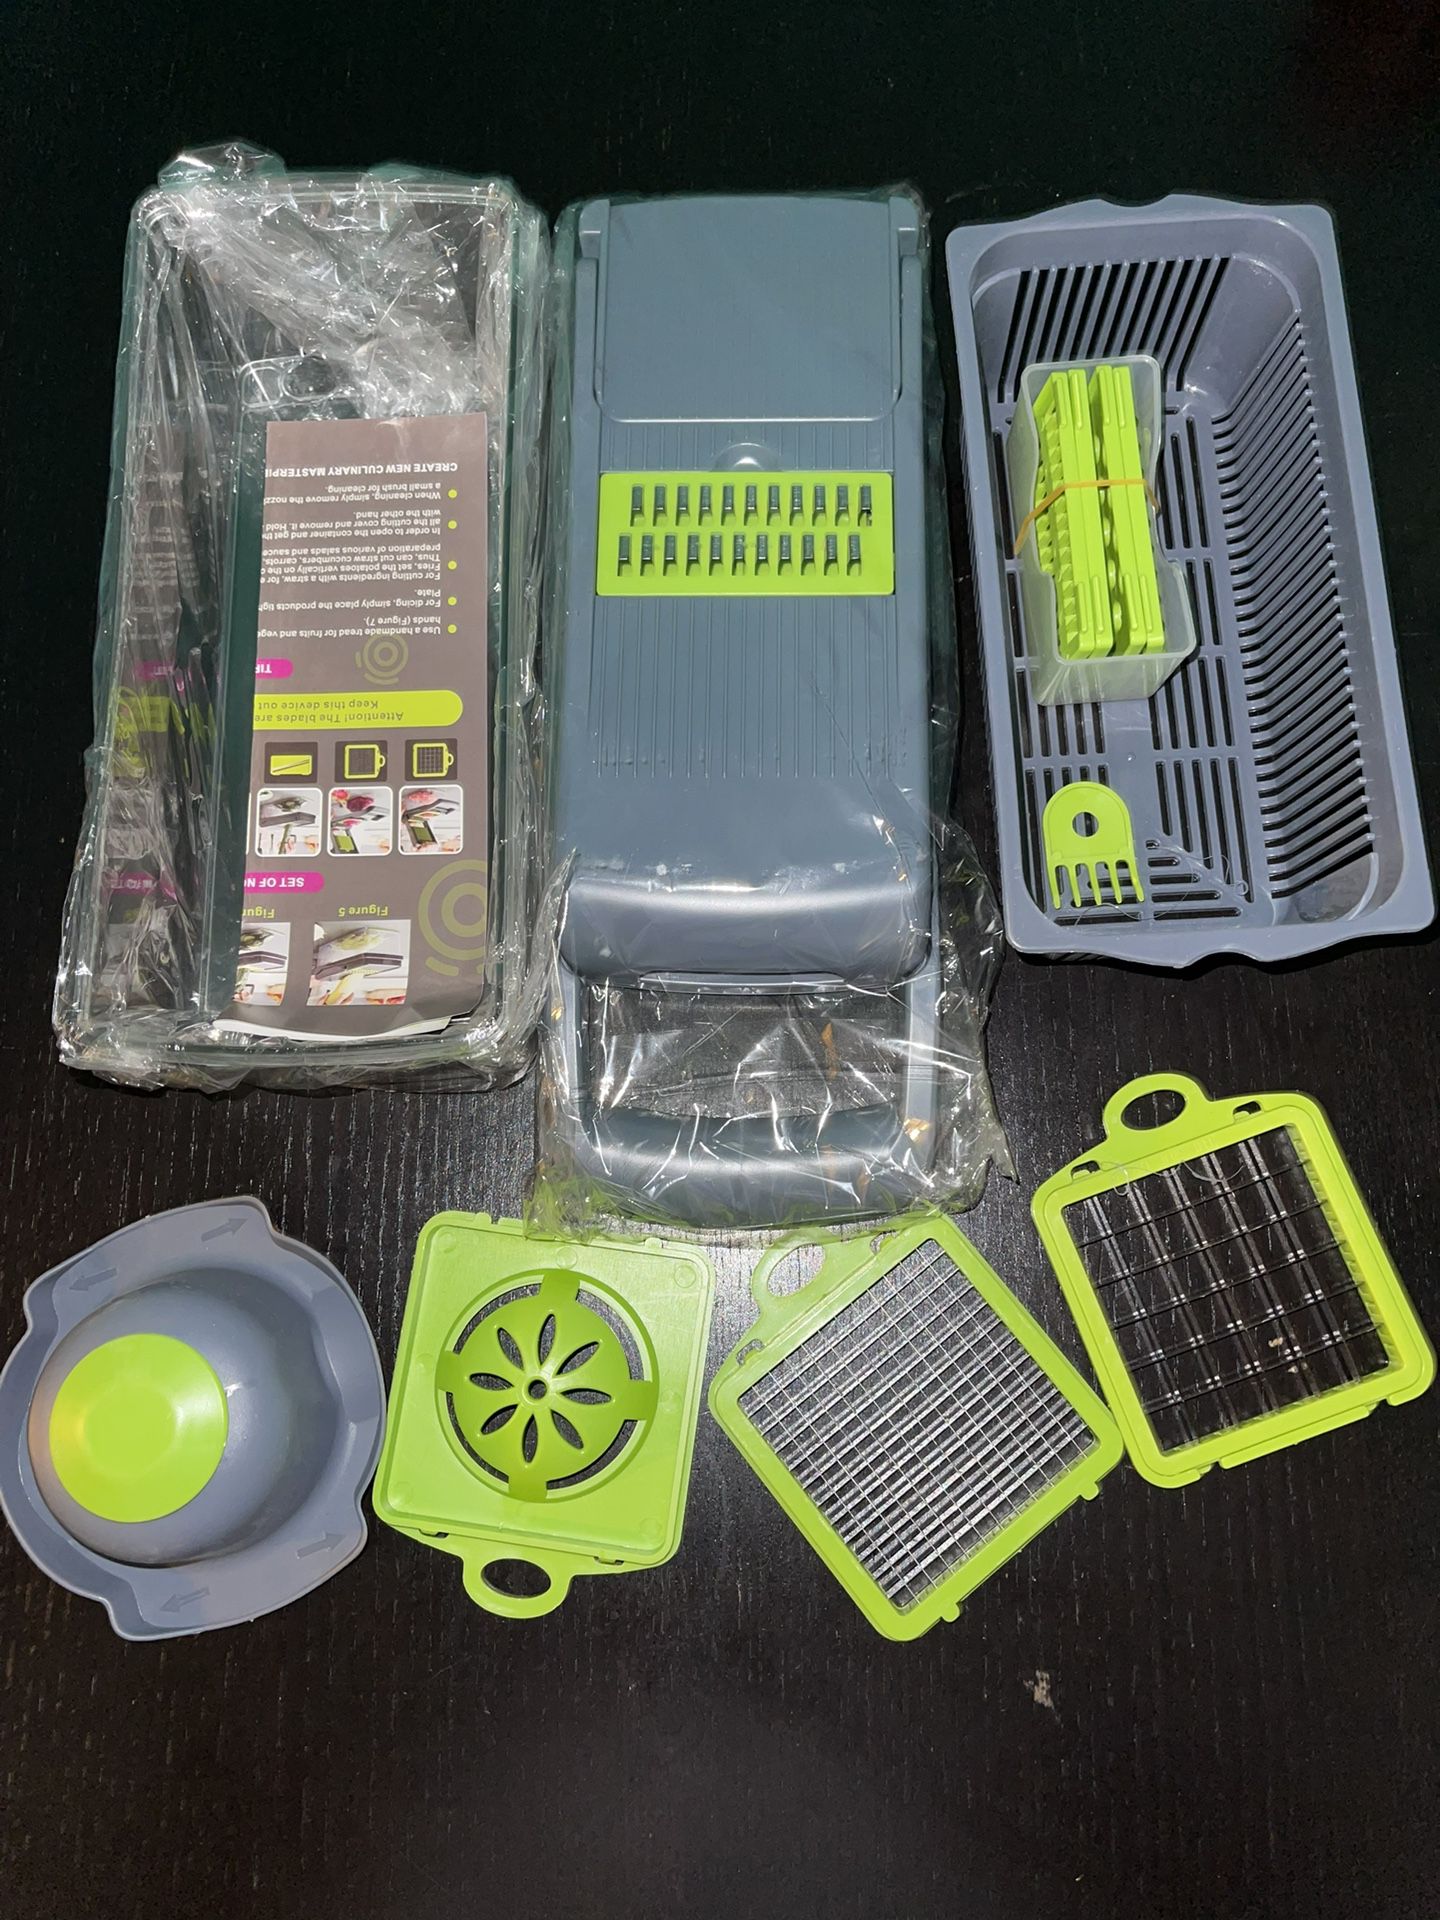 Multi-Purpose Vegetable Chopper for Sale in Brooklyn, NY - OfferUp